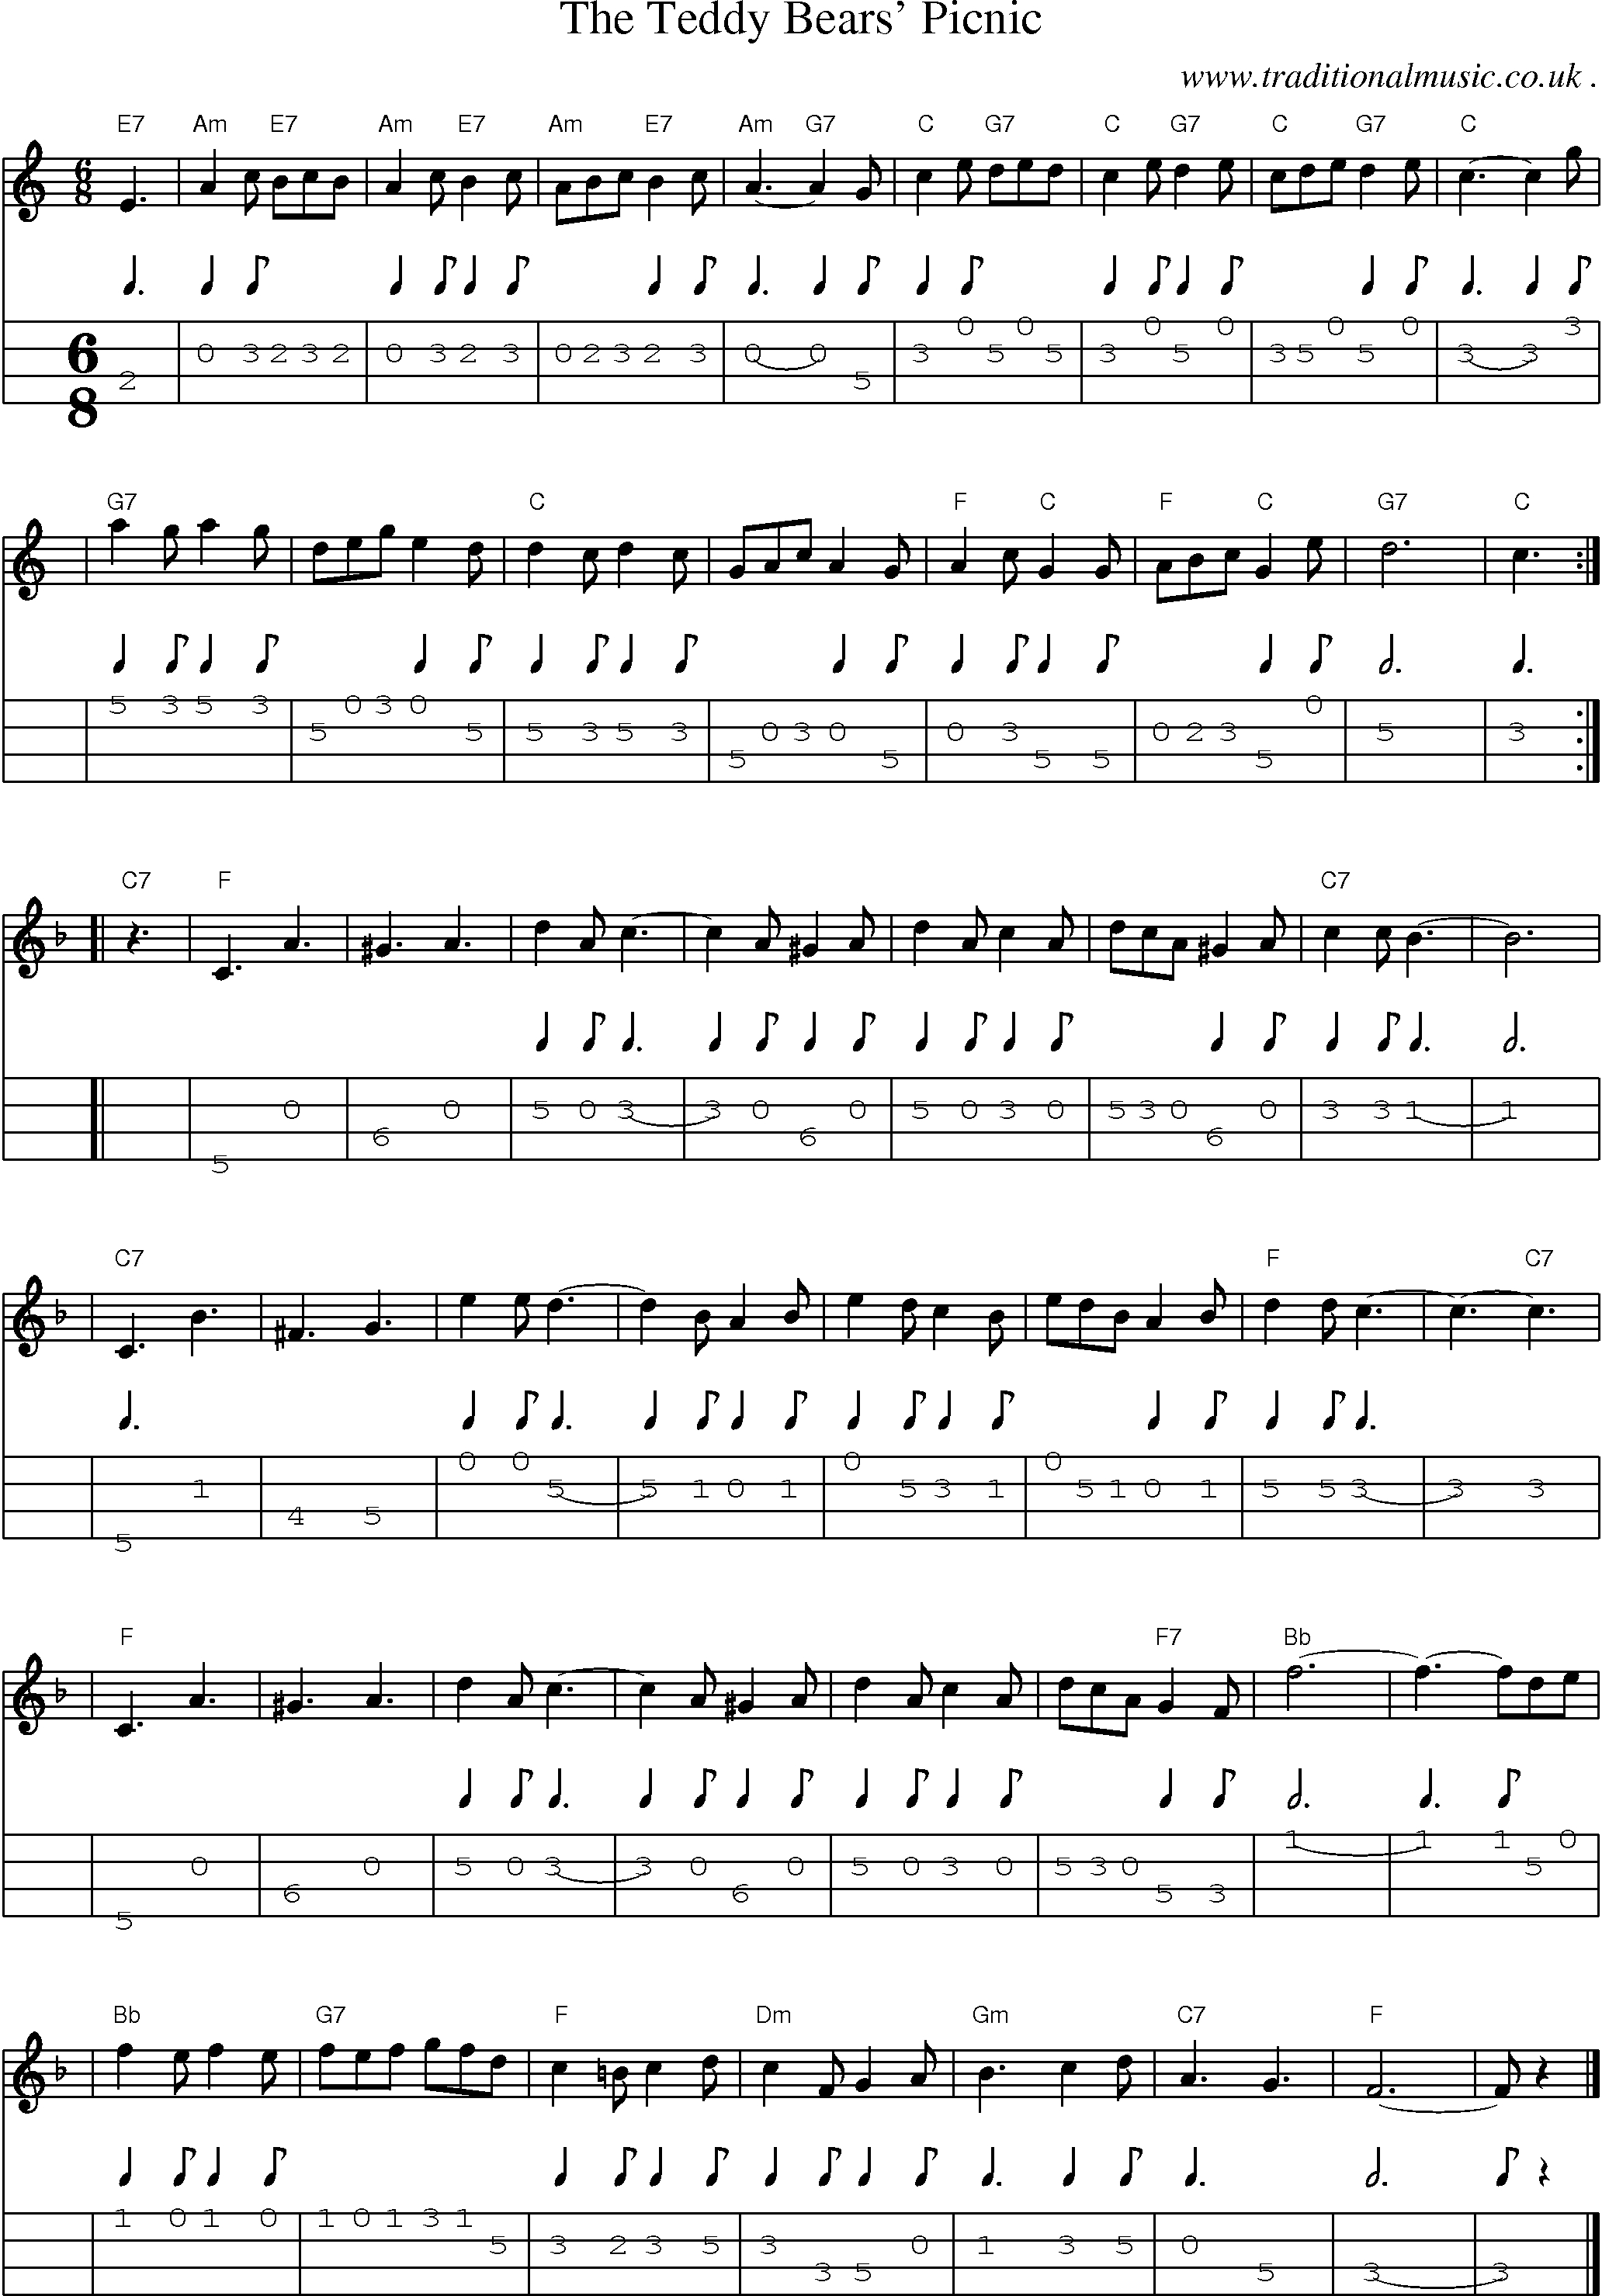 Sheet-music  score, Chords and Mandolin Tabs for The Teddy Bears Picnic